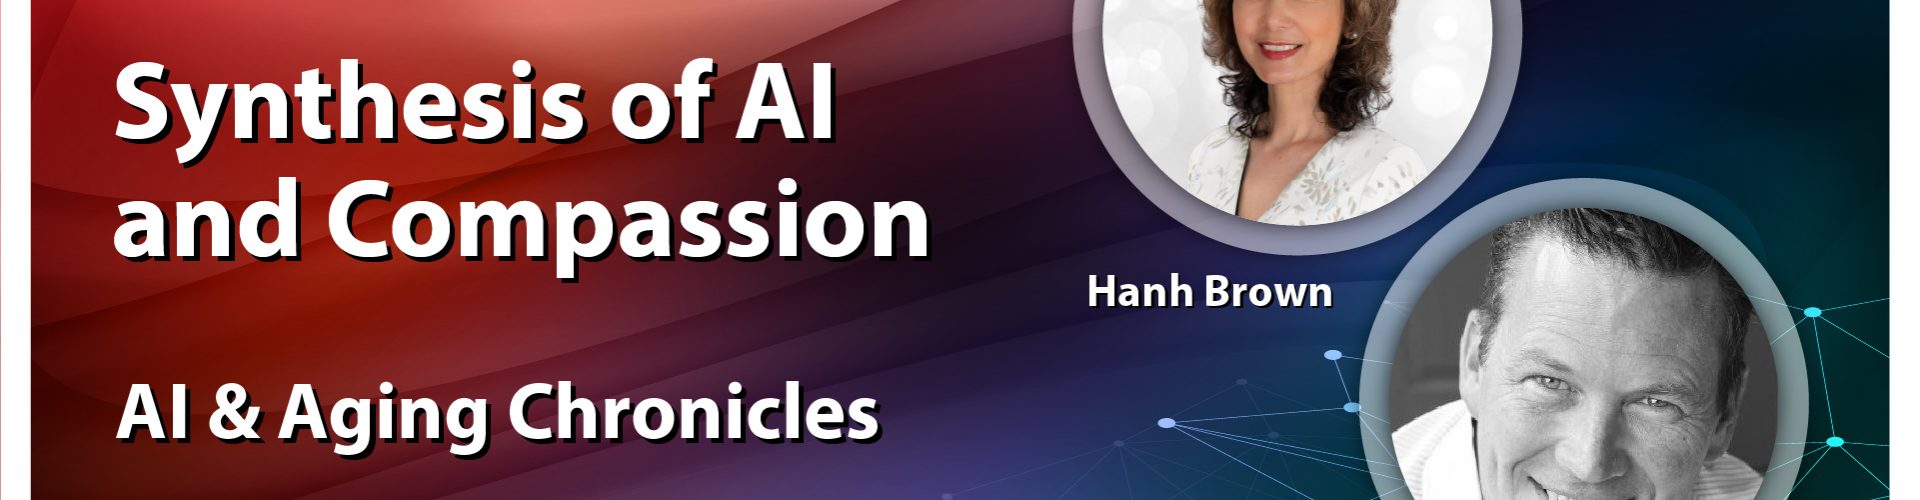 Henry Hays - Synthesis of AI and Compassion